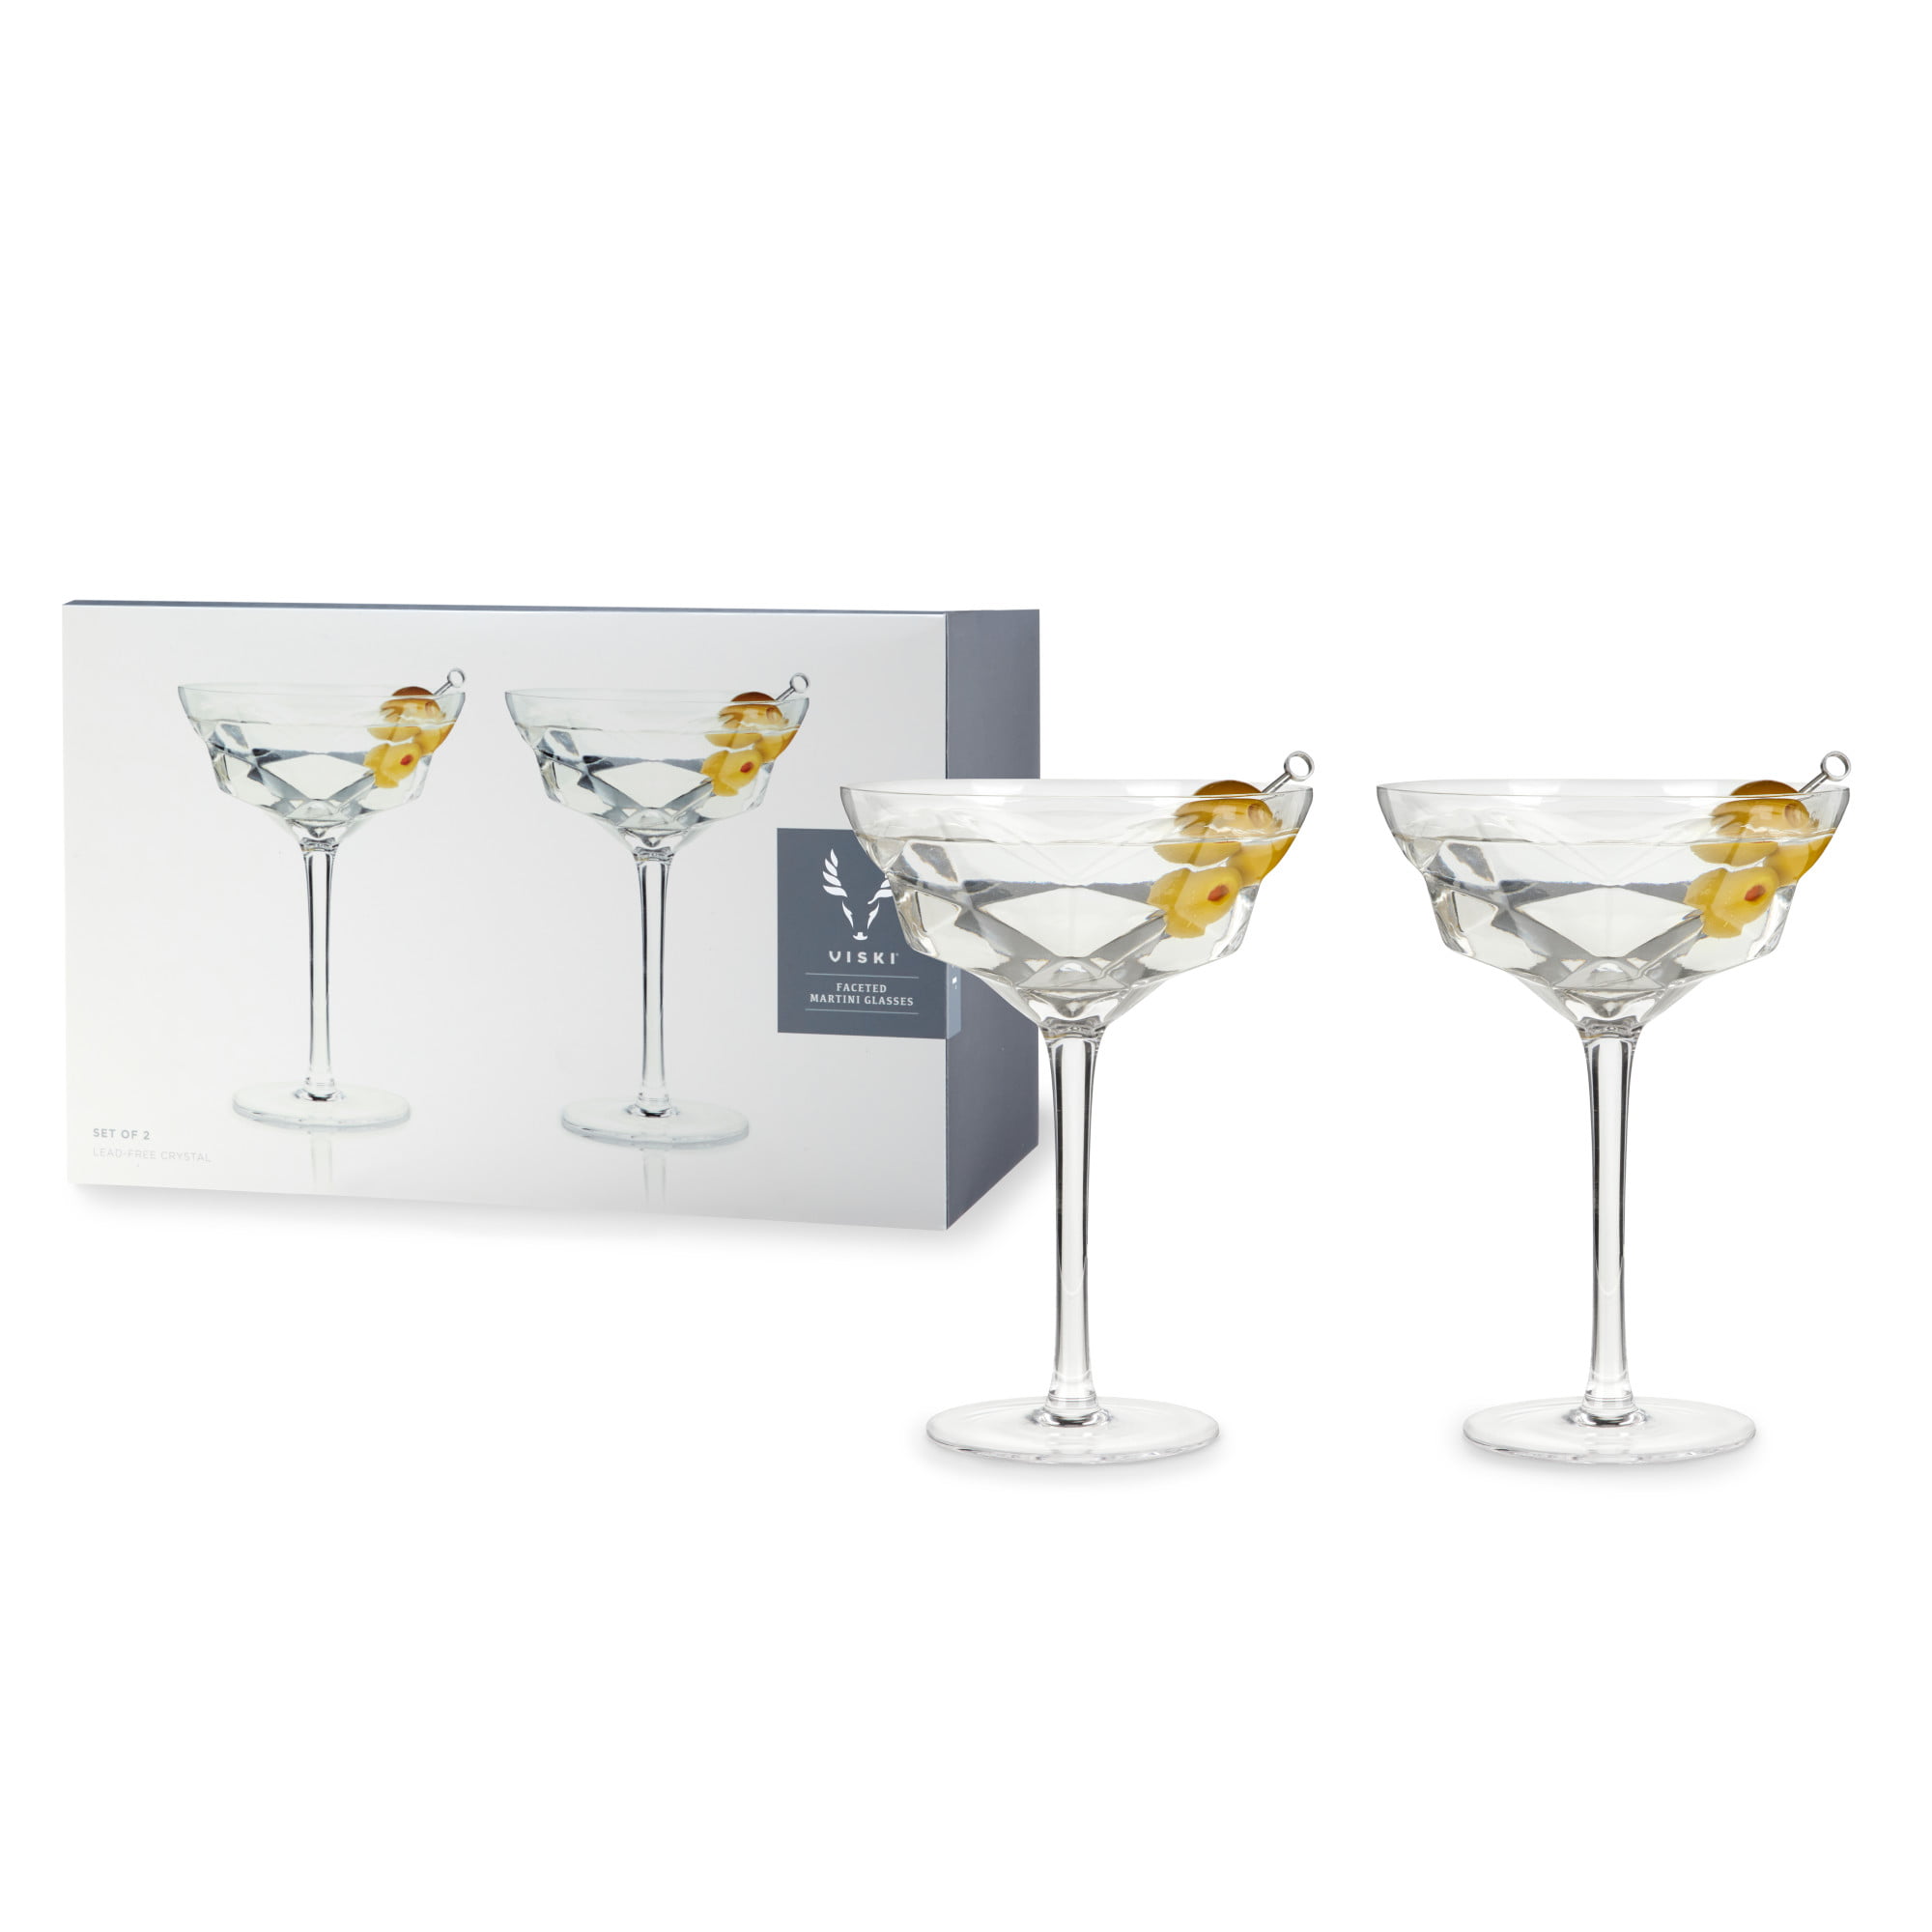 NEW SET OF 4 CLEAR,HANDMADE GOLD CRYSTALS ON STEM MARTINI,COCKTAIL GLASSES 